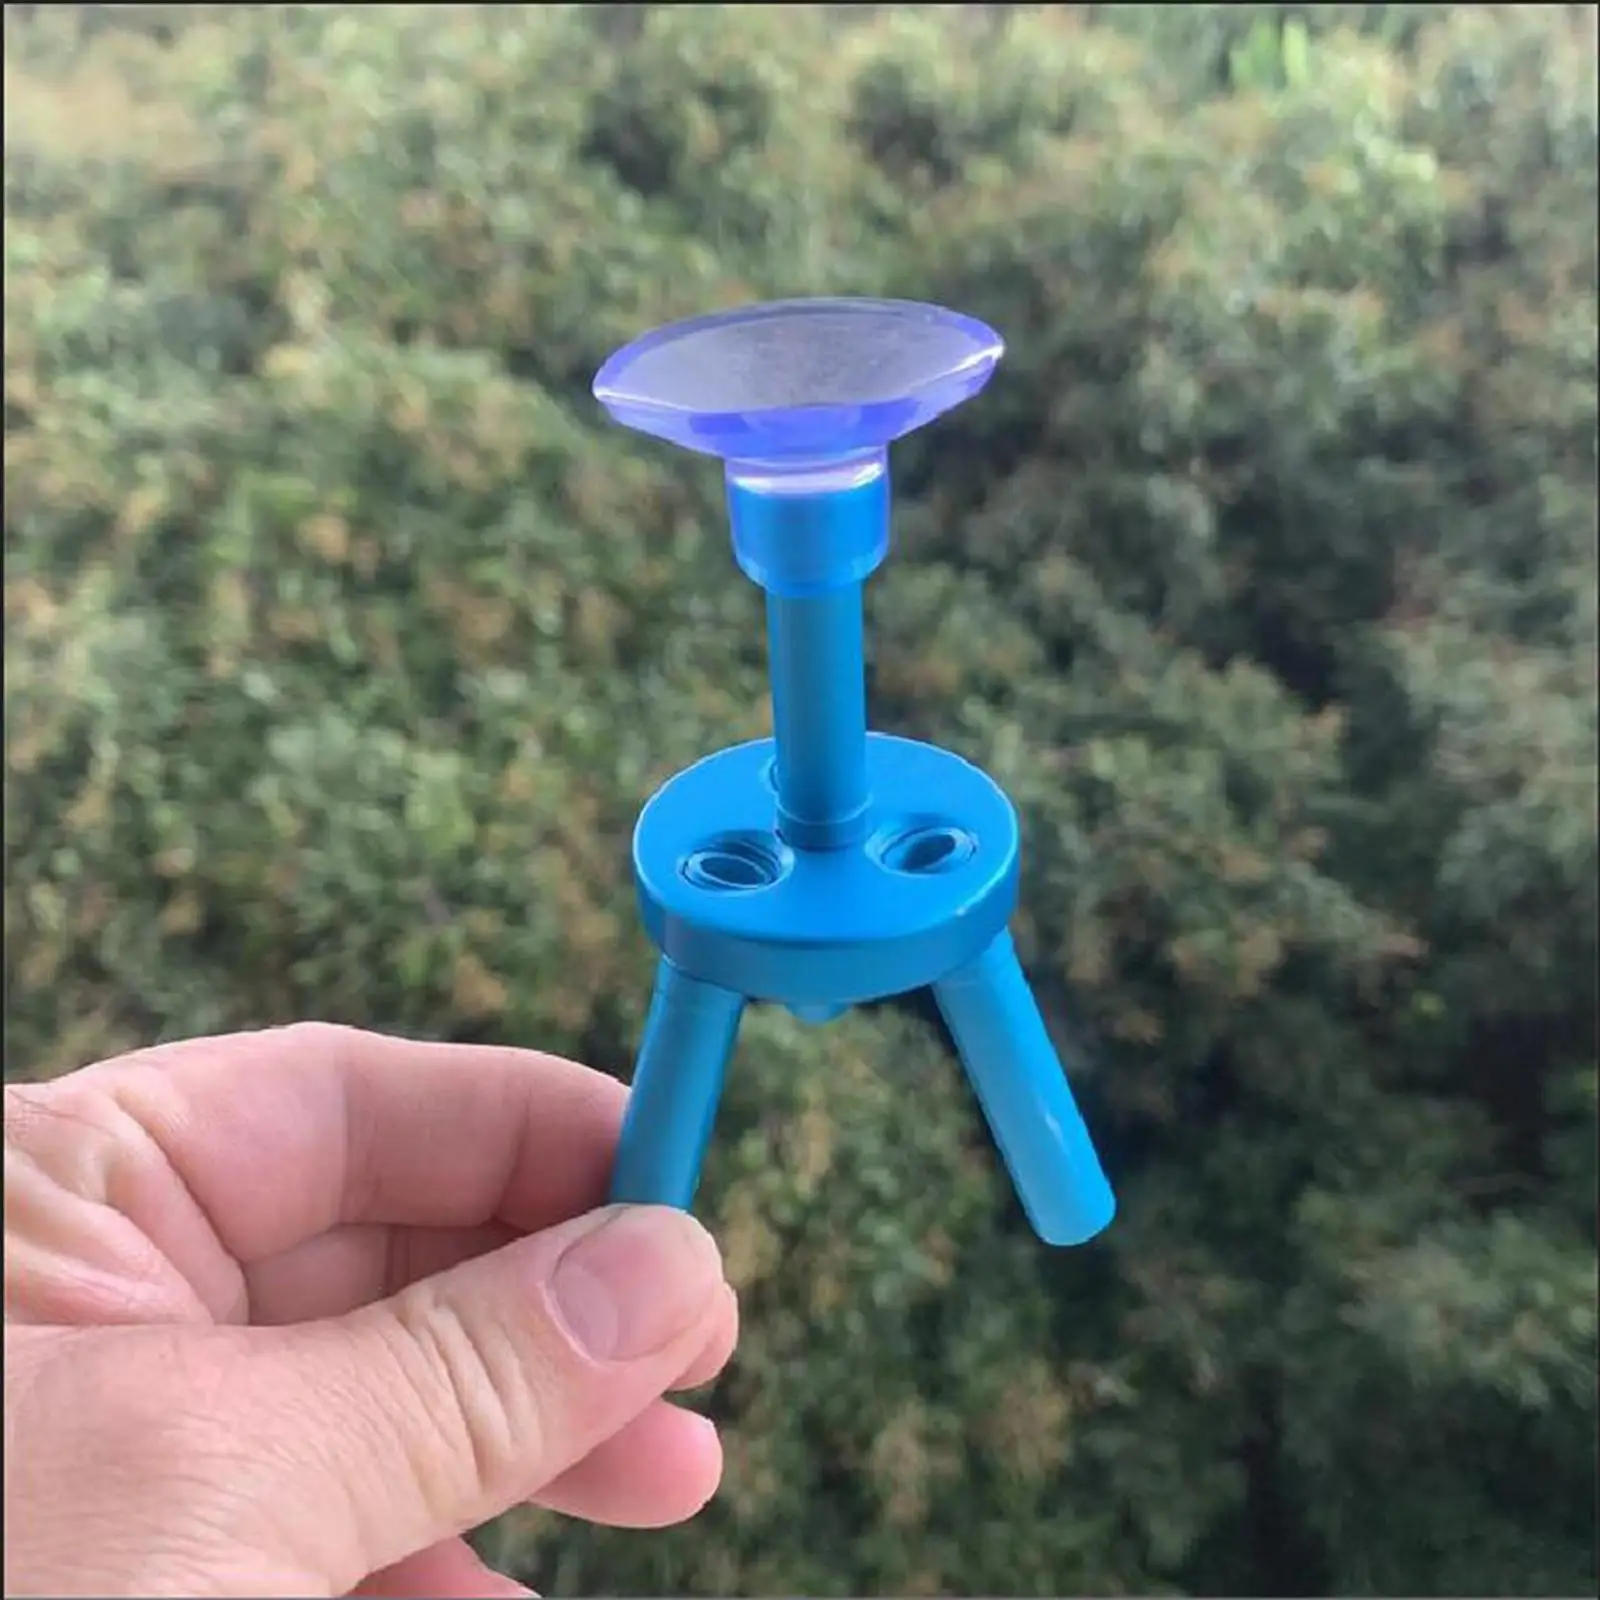 Tent Pole Connector Furniture Garden Shelf Greenhouse Support Thimble Aluminum Alloy Tent Pole Tips Cap for Outdoor Camping